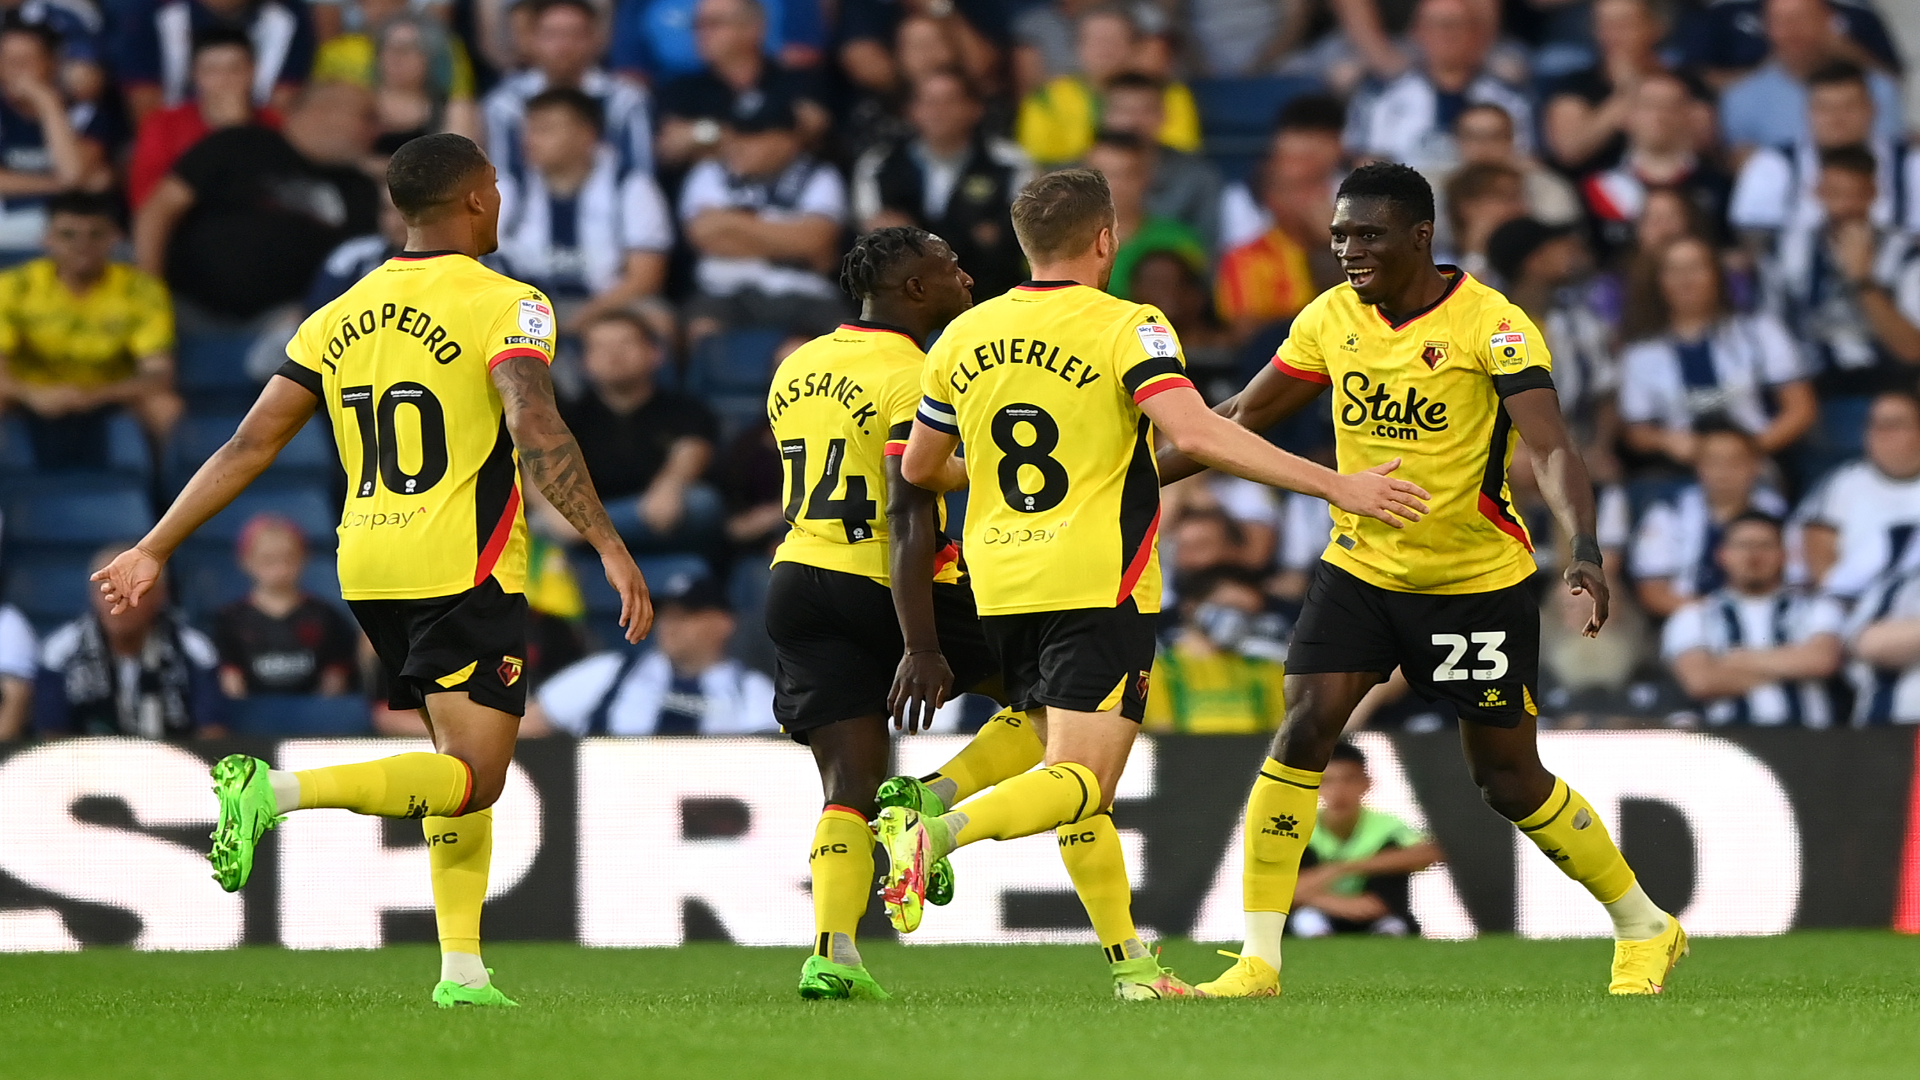 WATCH: Watford's Sarr scores incredible goal from own half | Goal.com  Nigeria